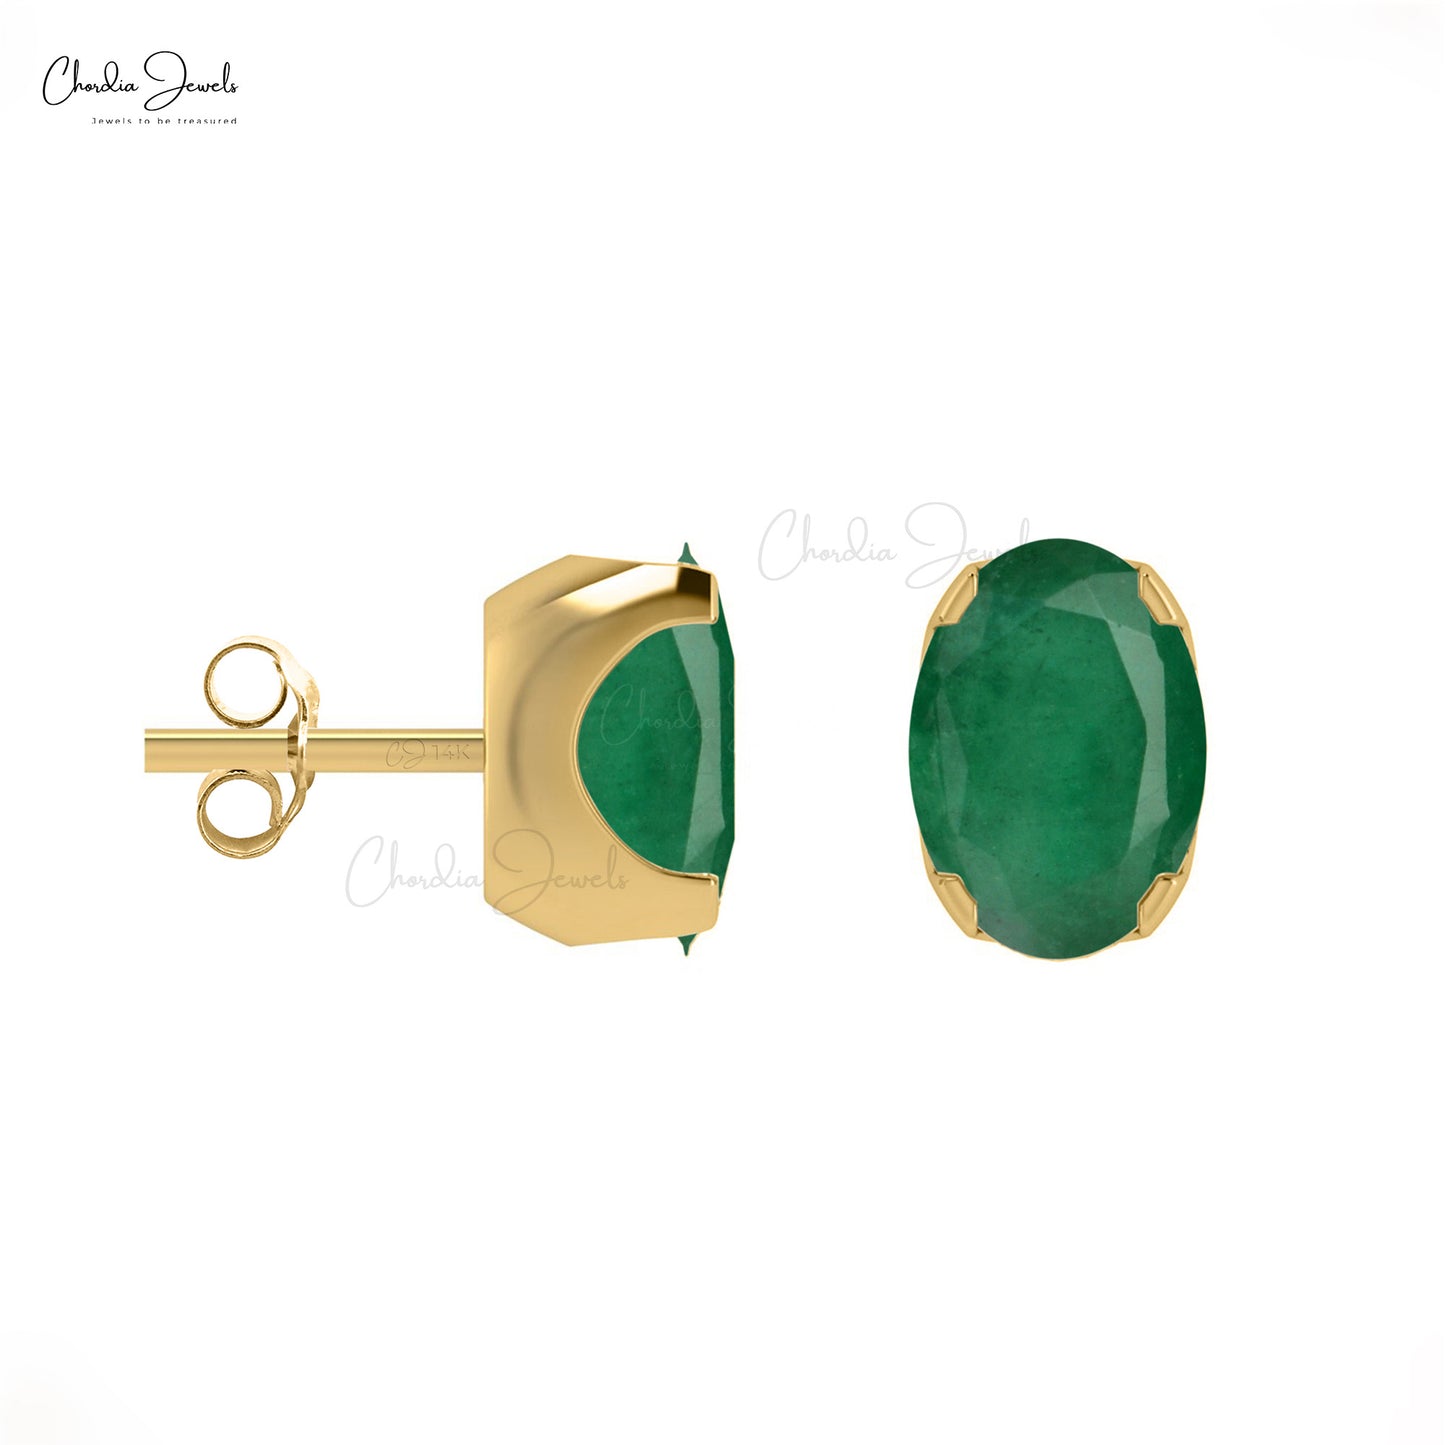 Enhance your personal style with our dainty emerald earrings.